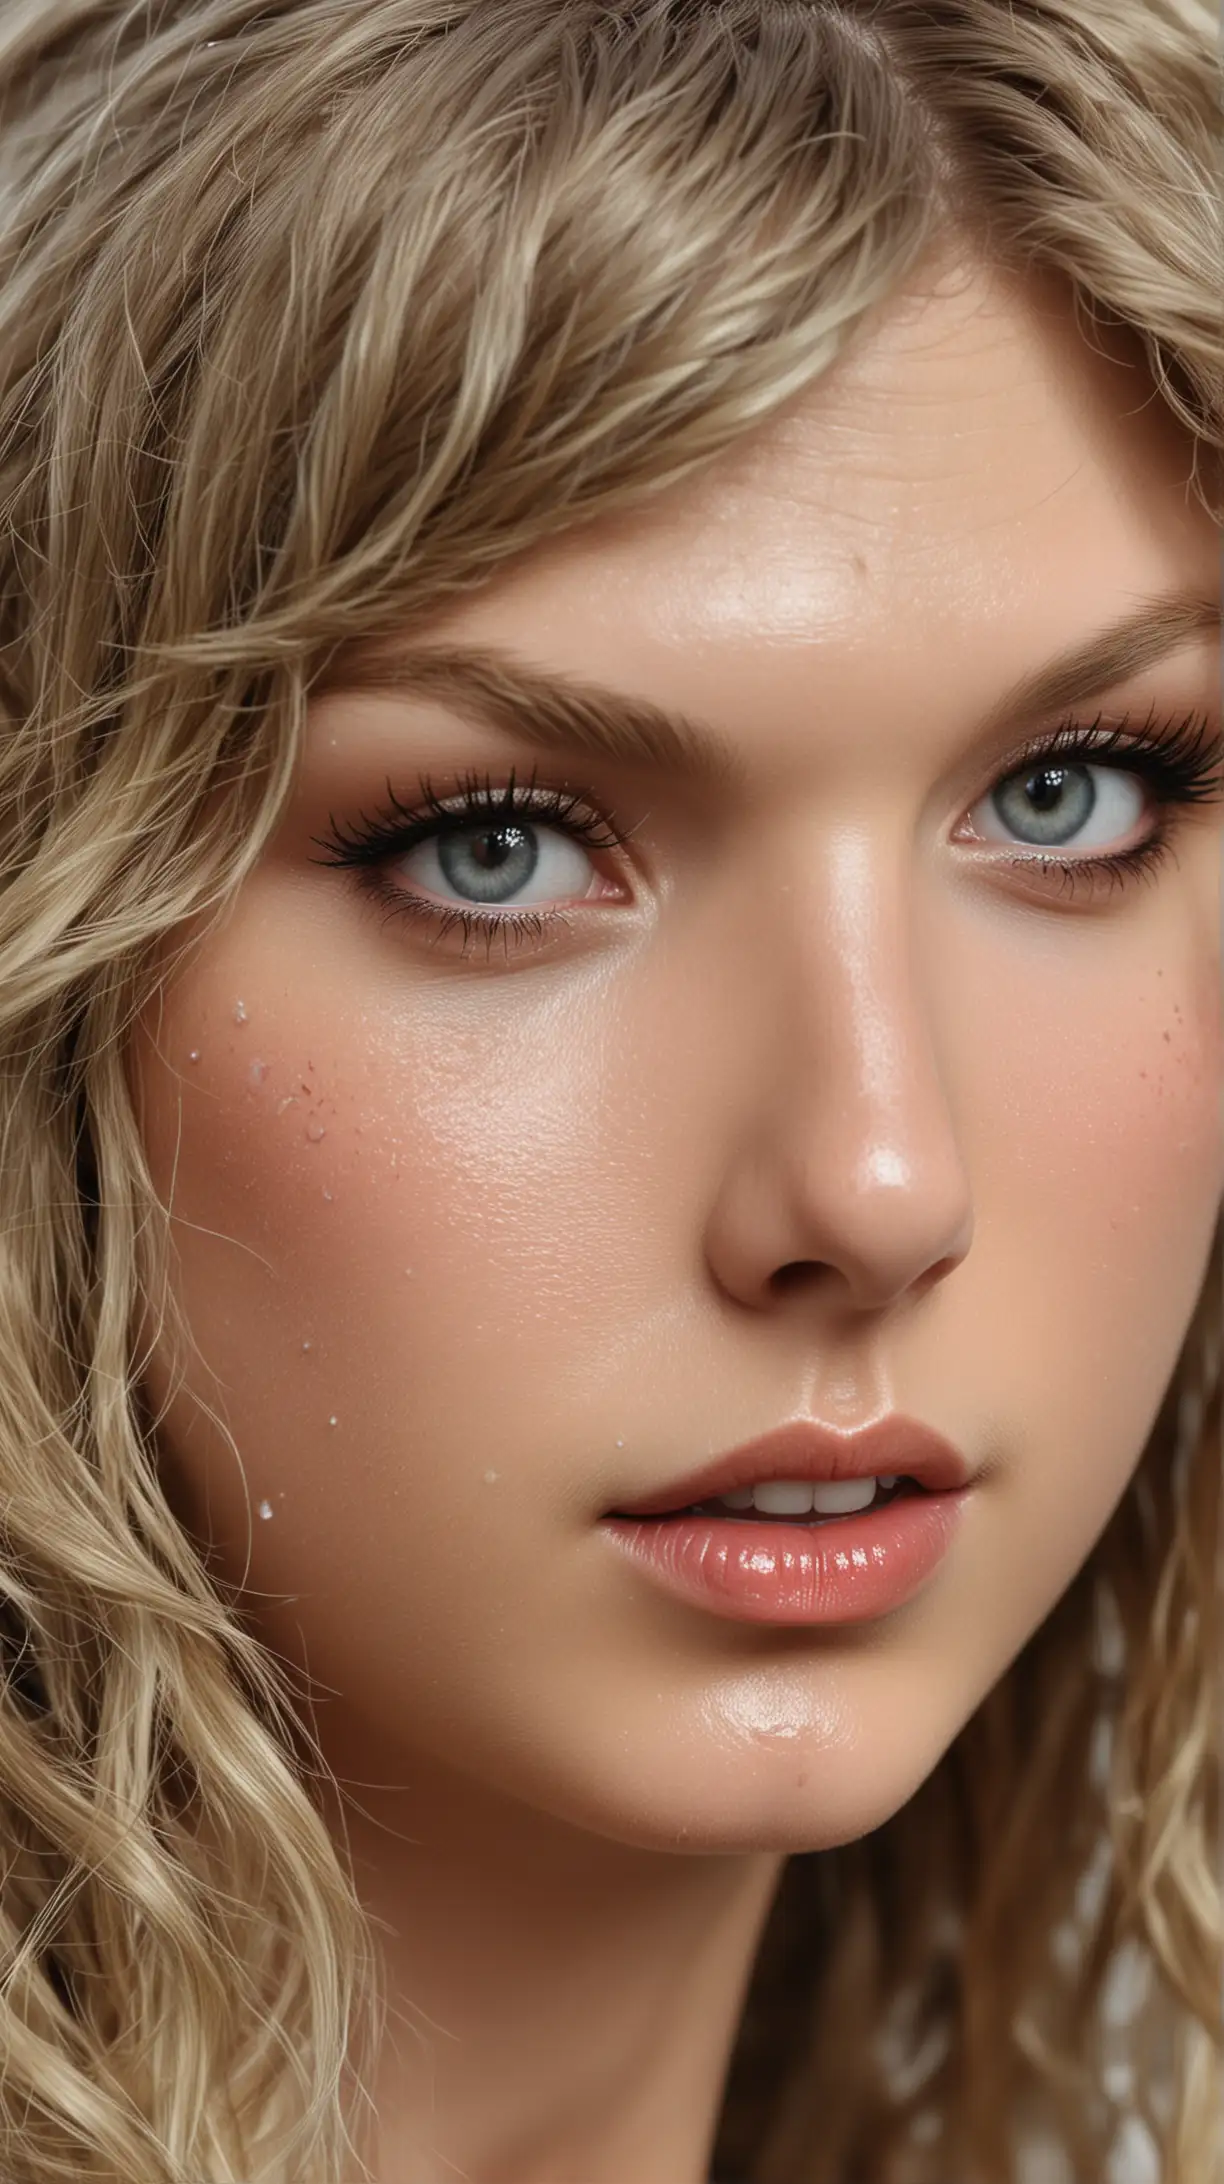 Taylor Swift with Whitish Translucent Liquid Realistic Photograph